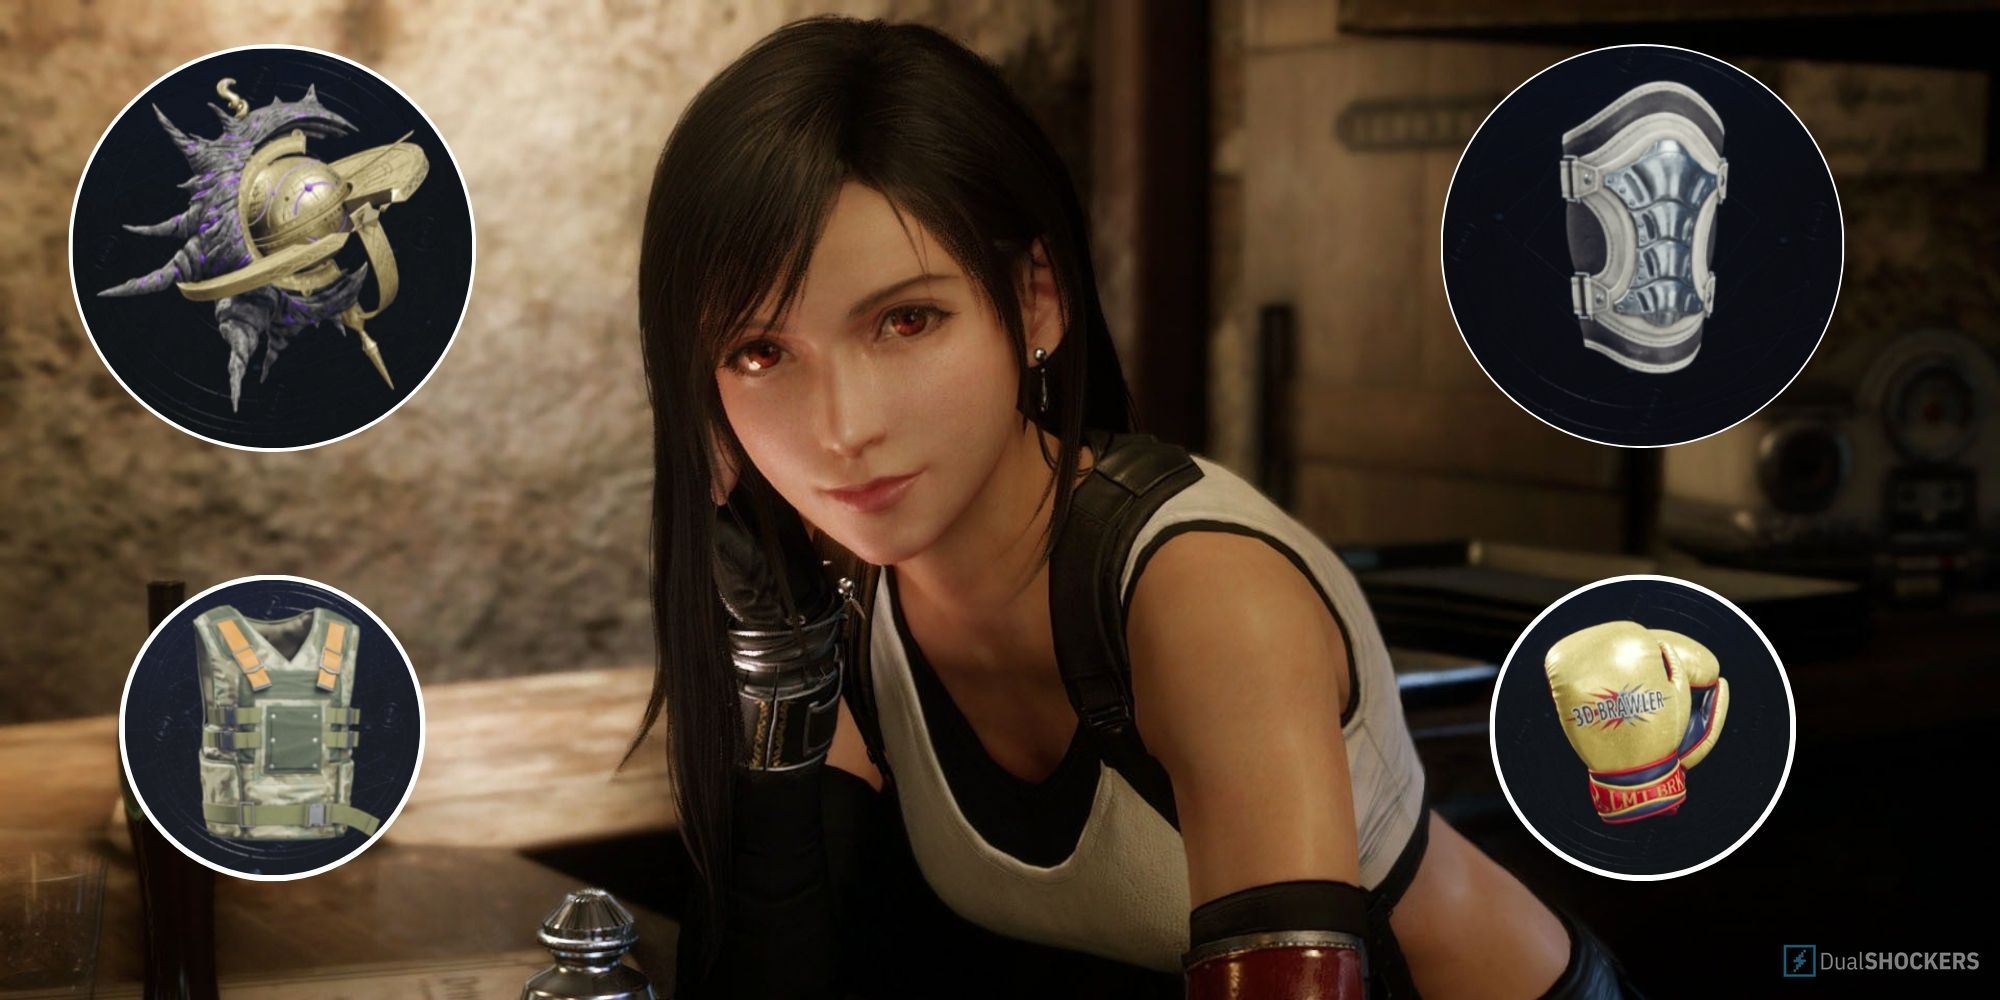 Tifa leaning on a counter surrounded by four accessories